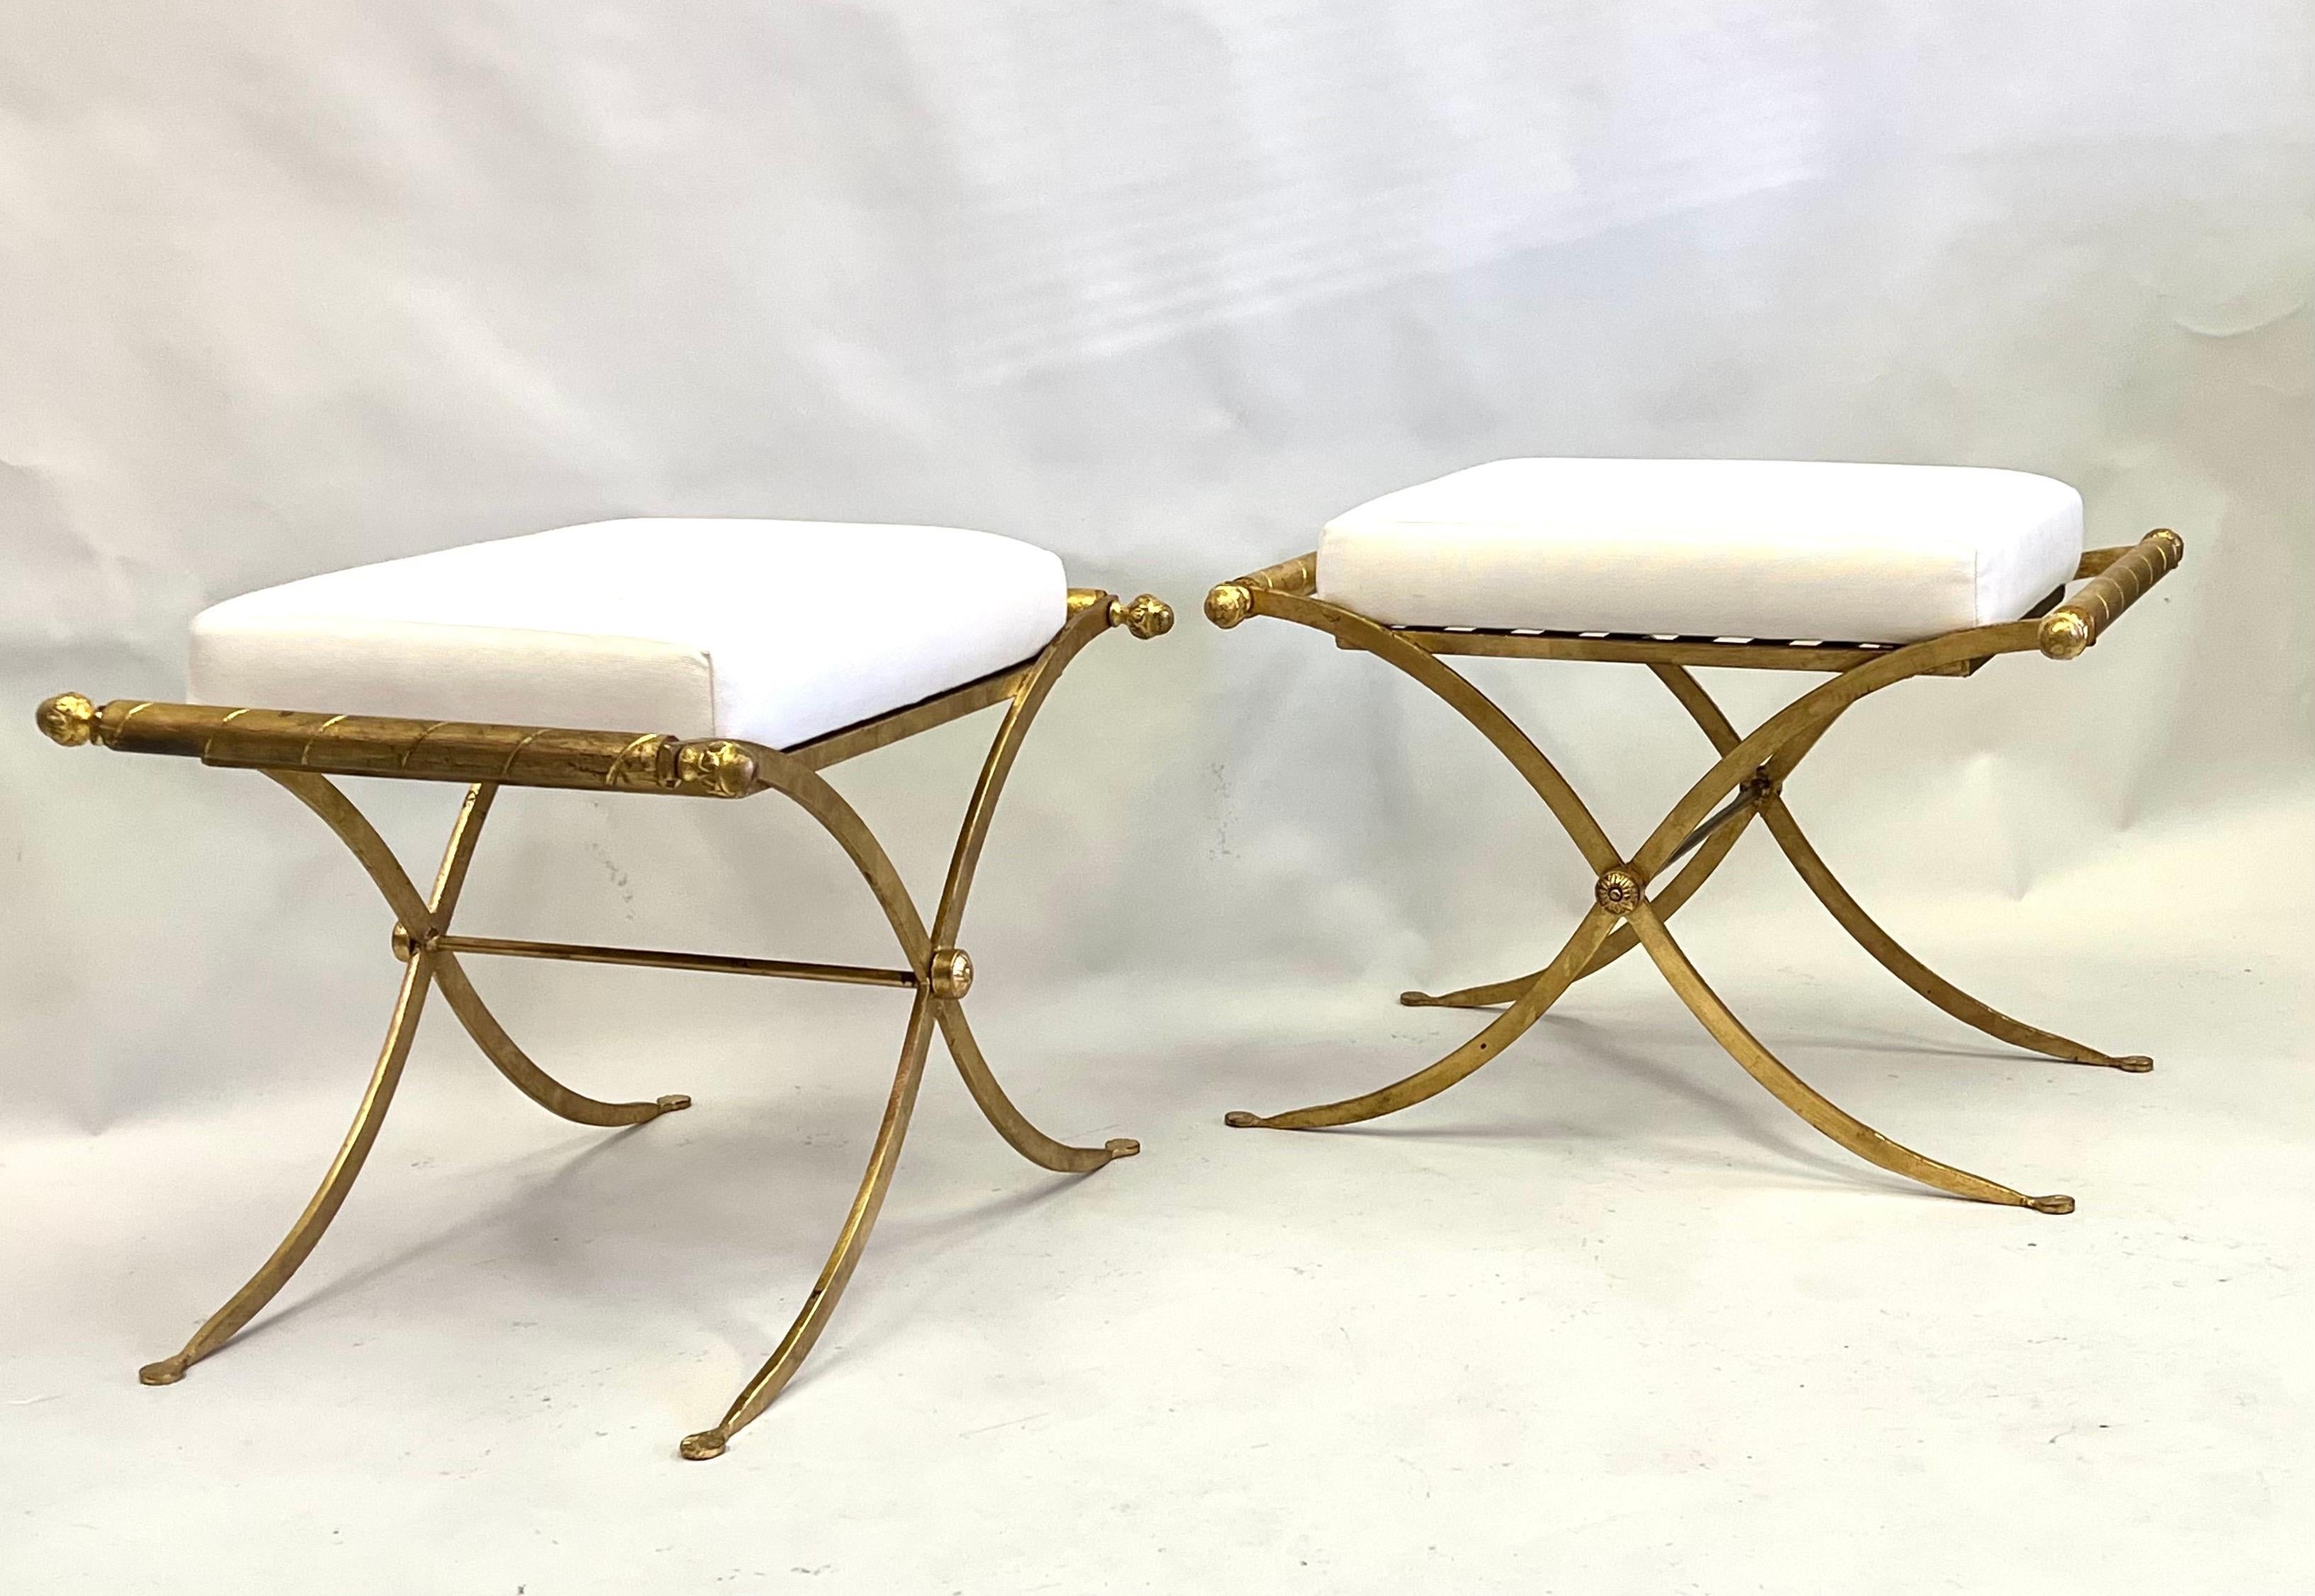 Pair of French Midcentury Modern Neoclassical Gilt Iron Benches, Raymond Subes 1